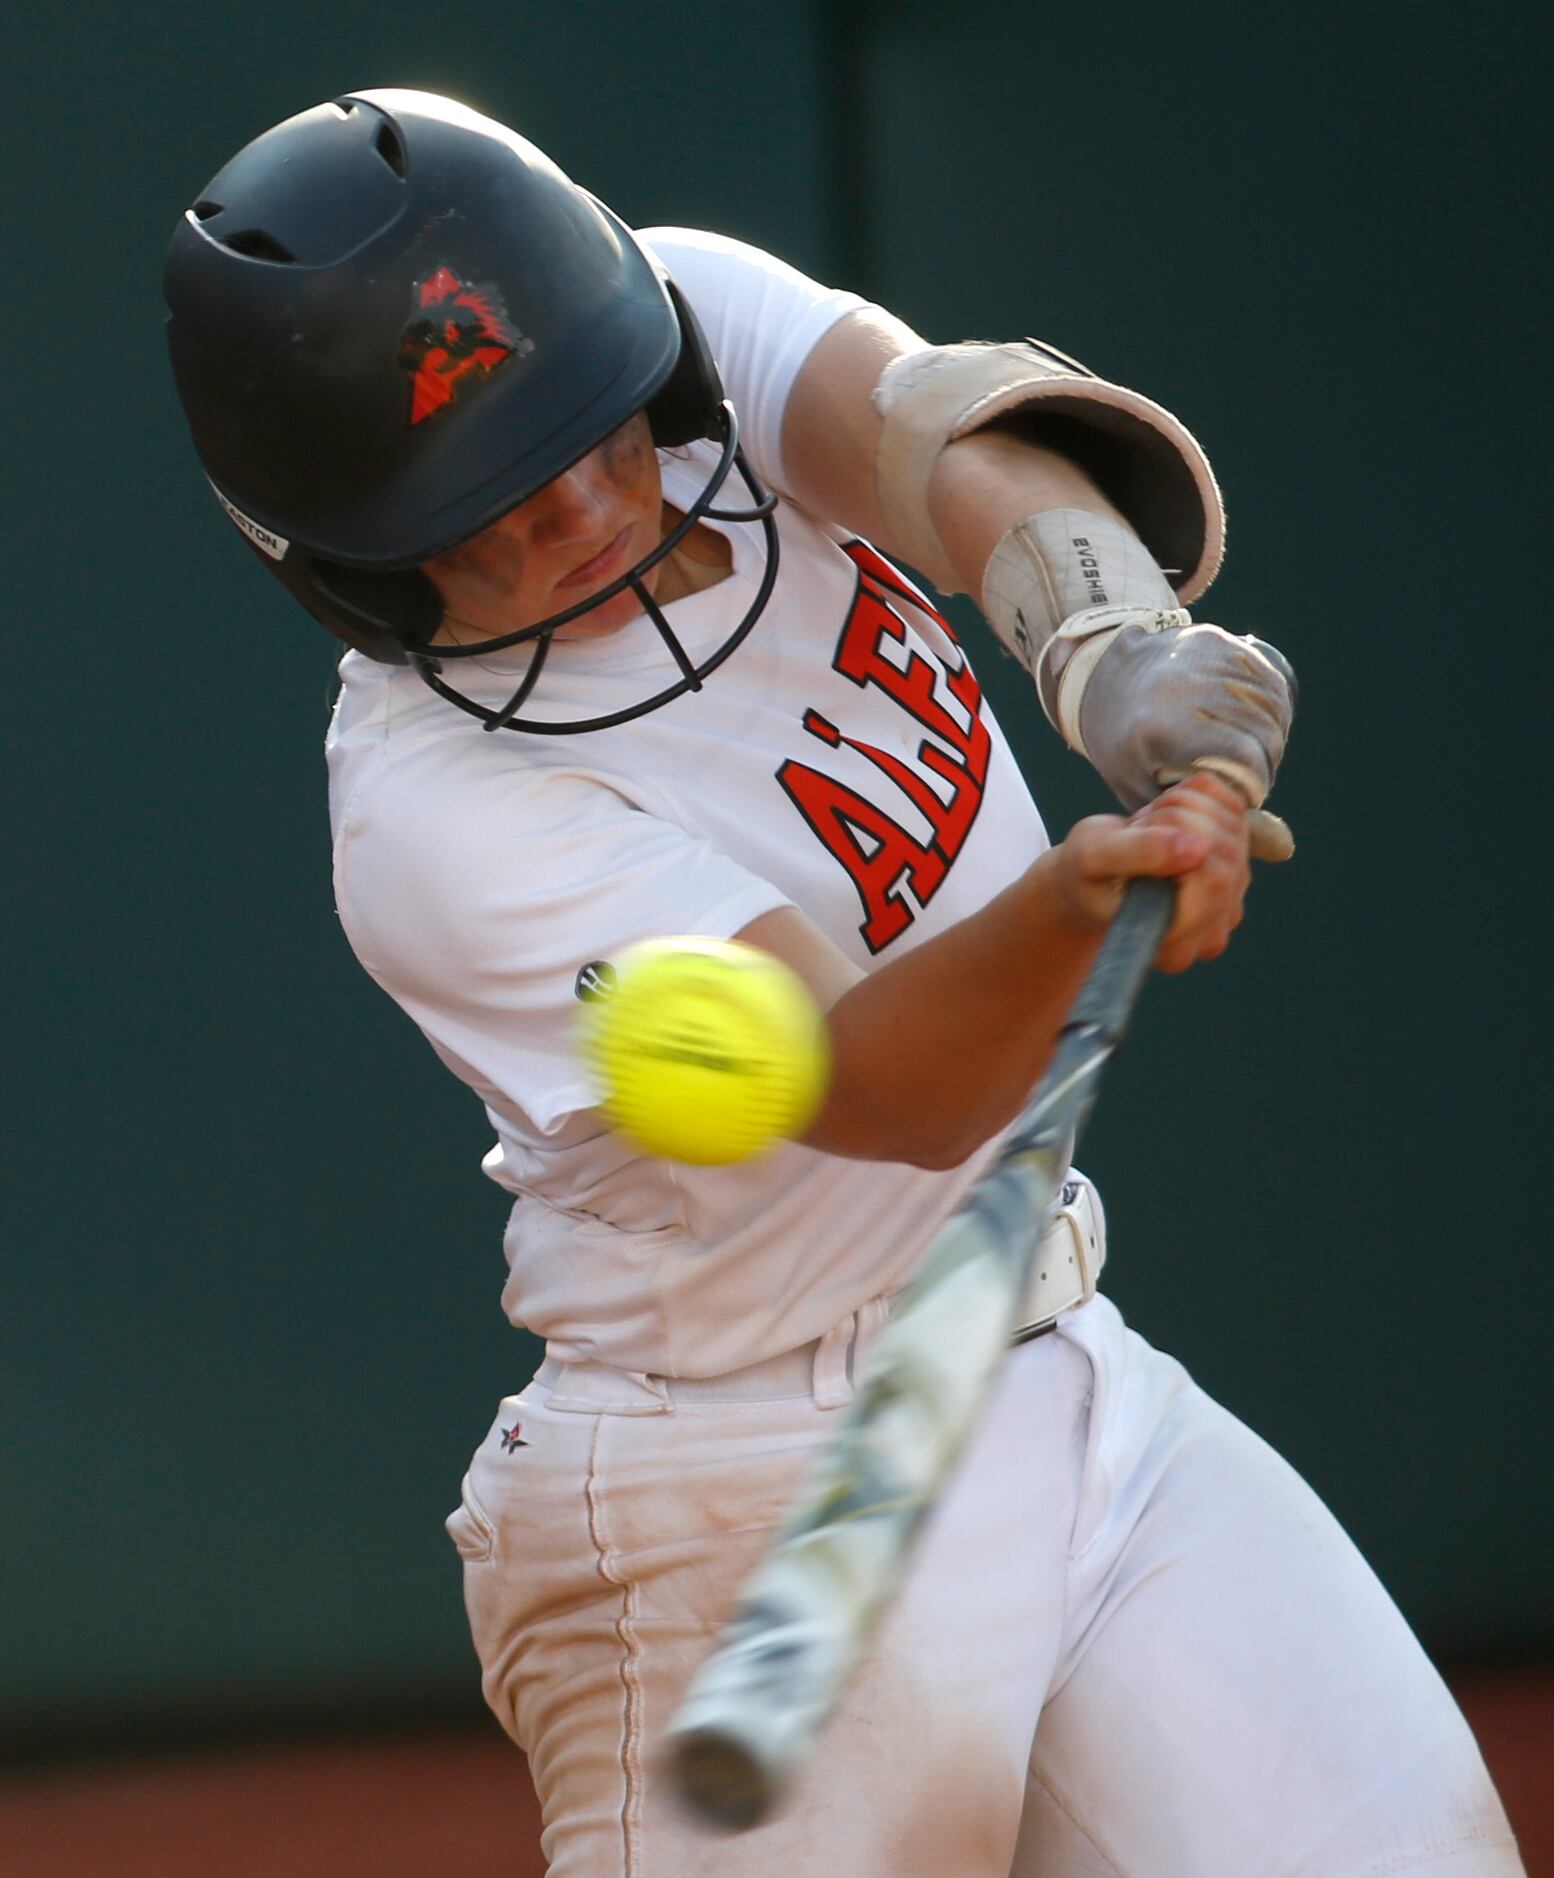 Aledo's Morgan Brown (7) is unable to connect with a fastball while batting in the bottom of...